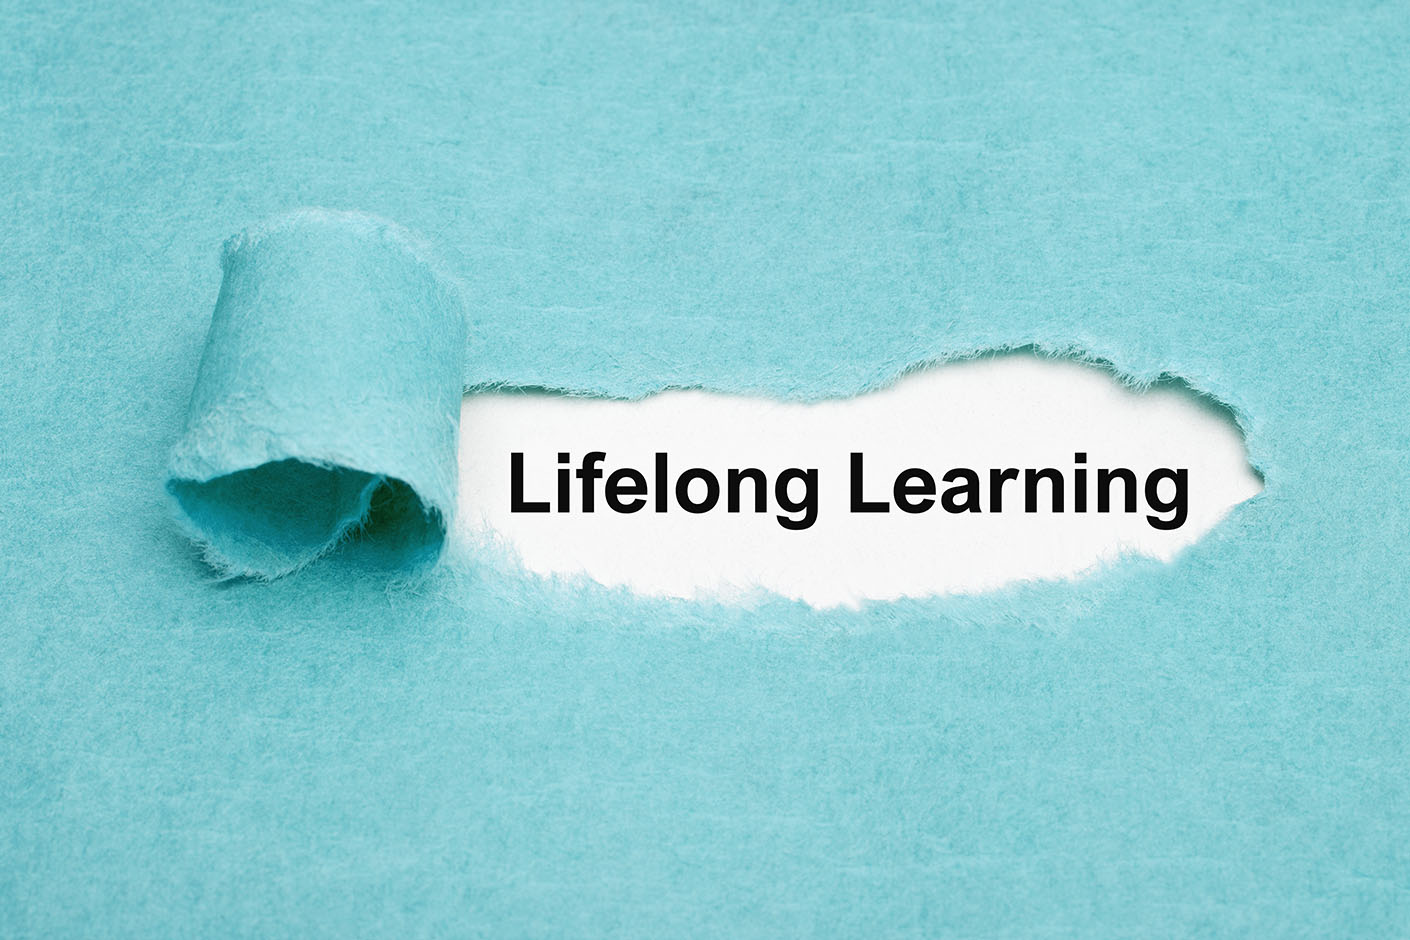 The gift that keeps on giving: Lifelong learning